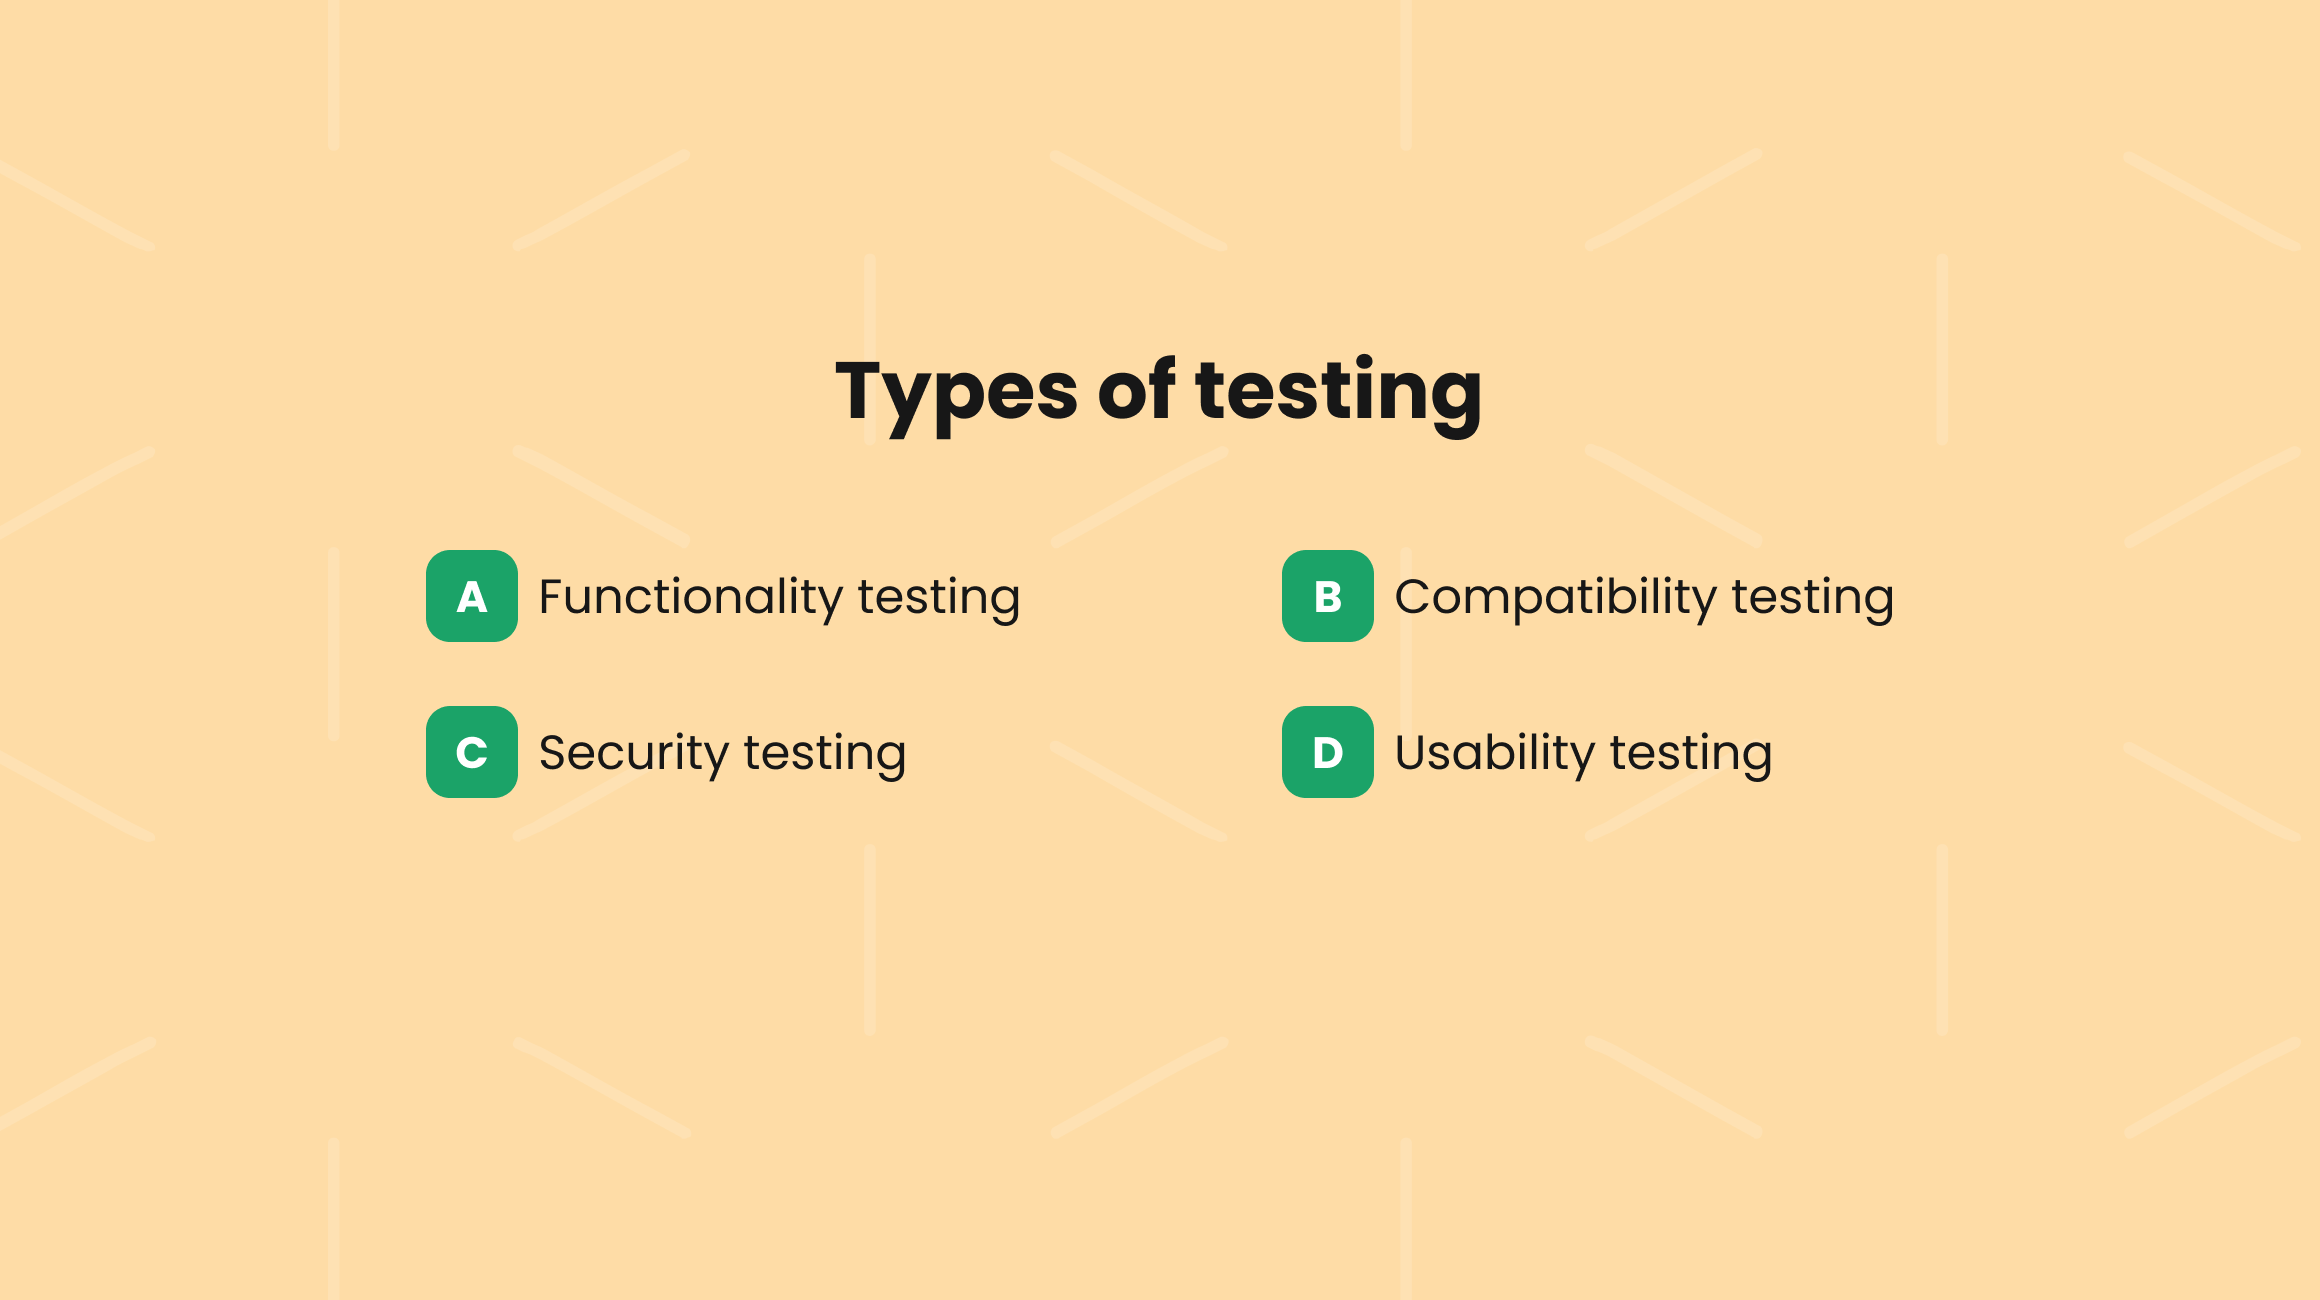 Types of software testing